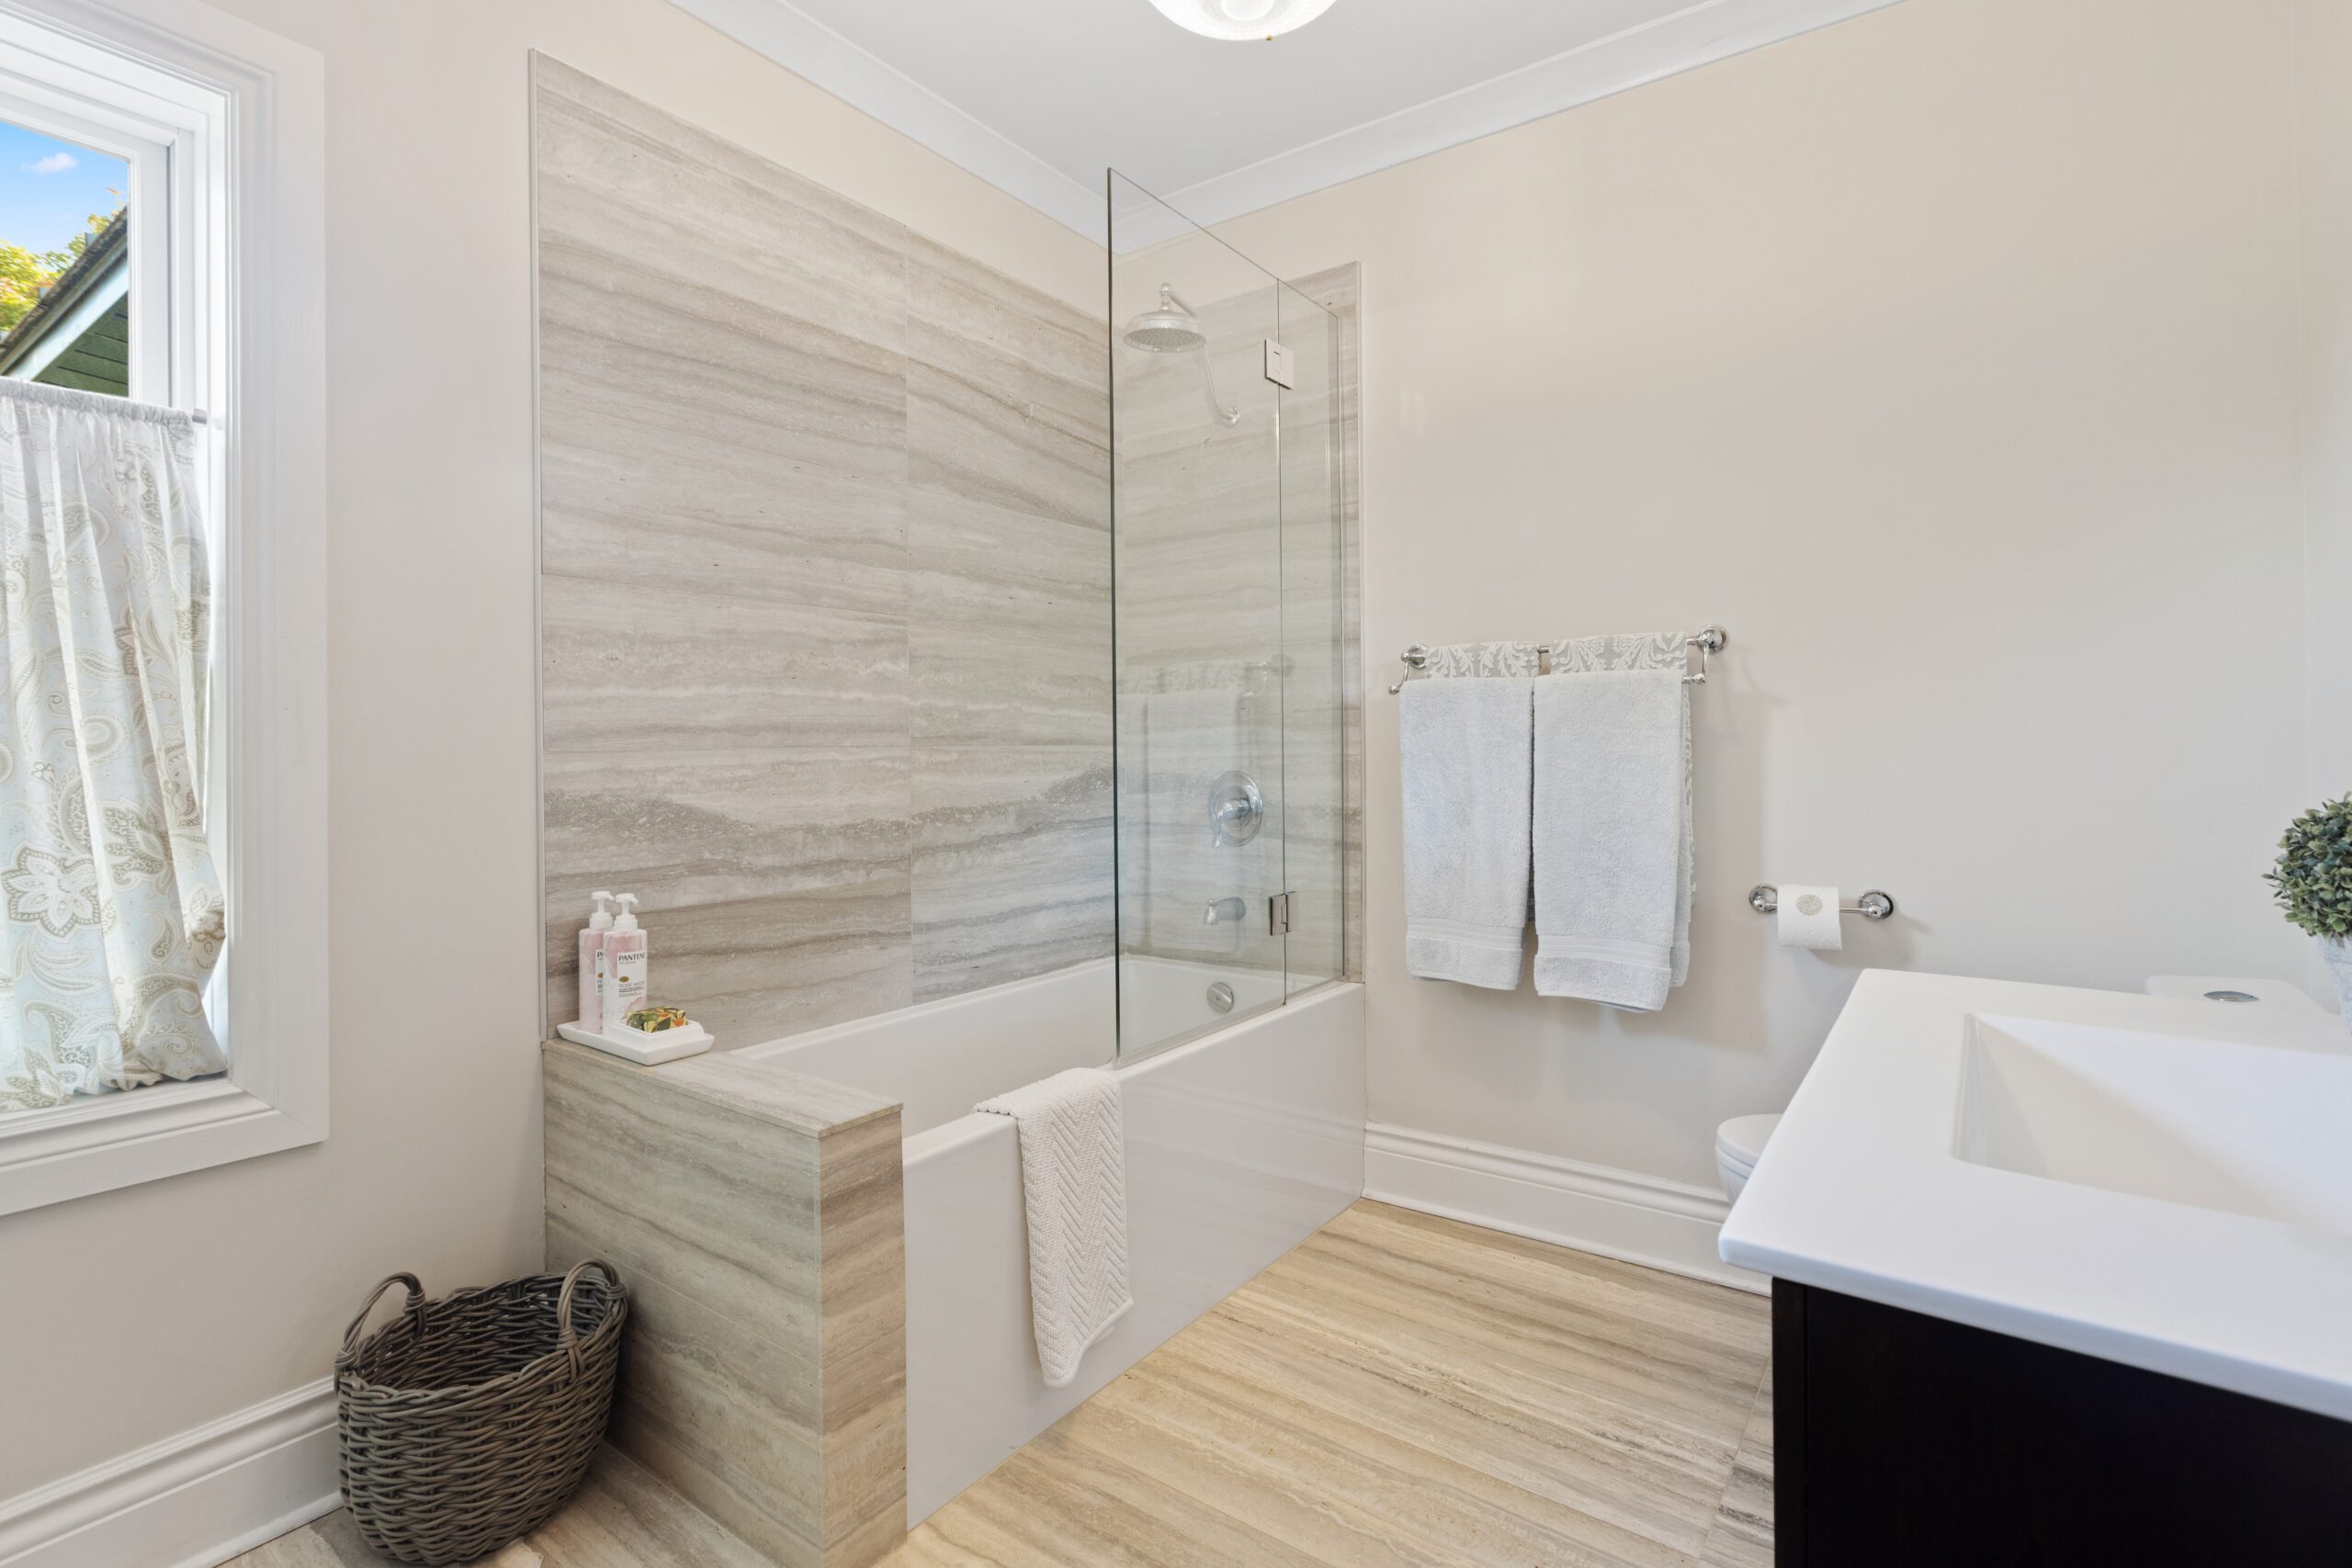 5 Crucial Things to Consider During a Bathroom Remodeling